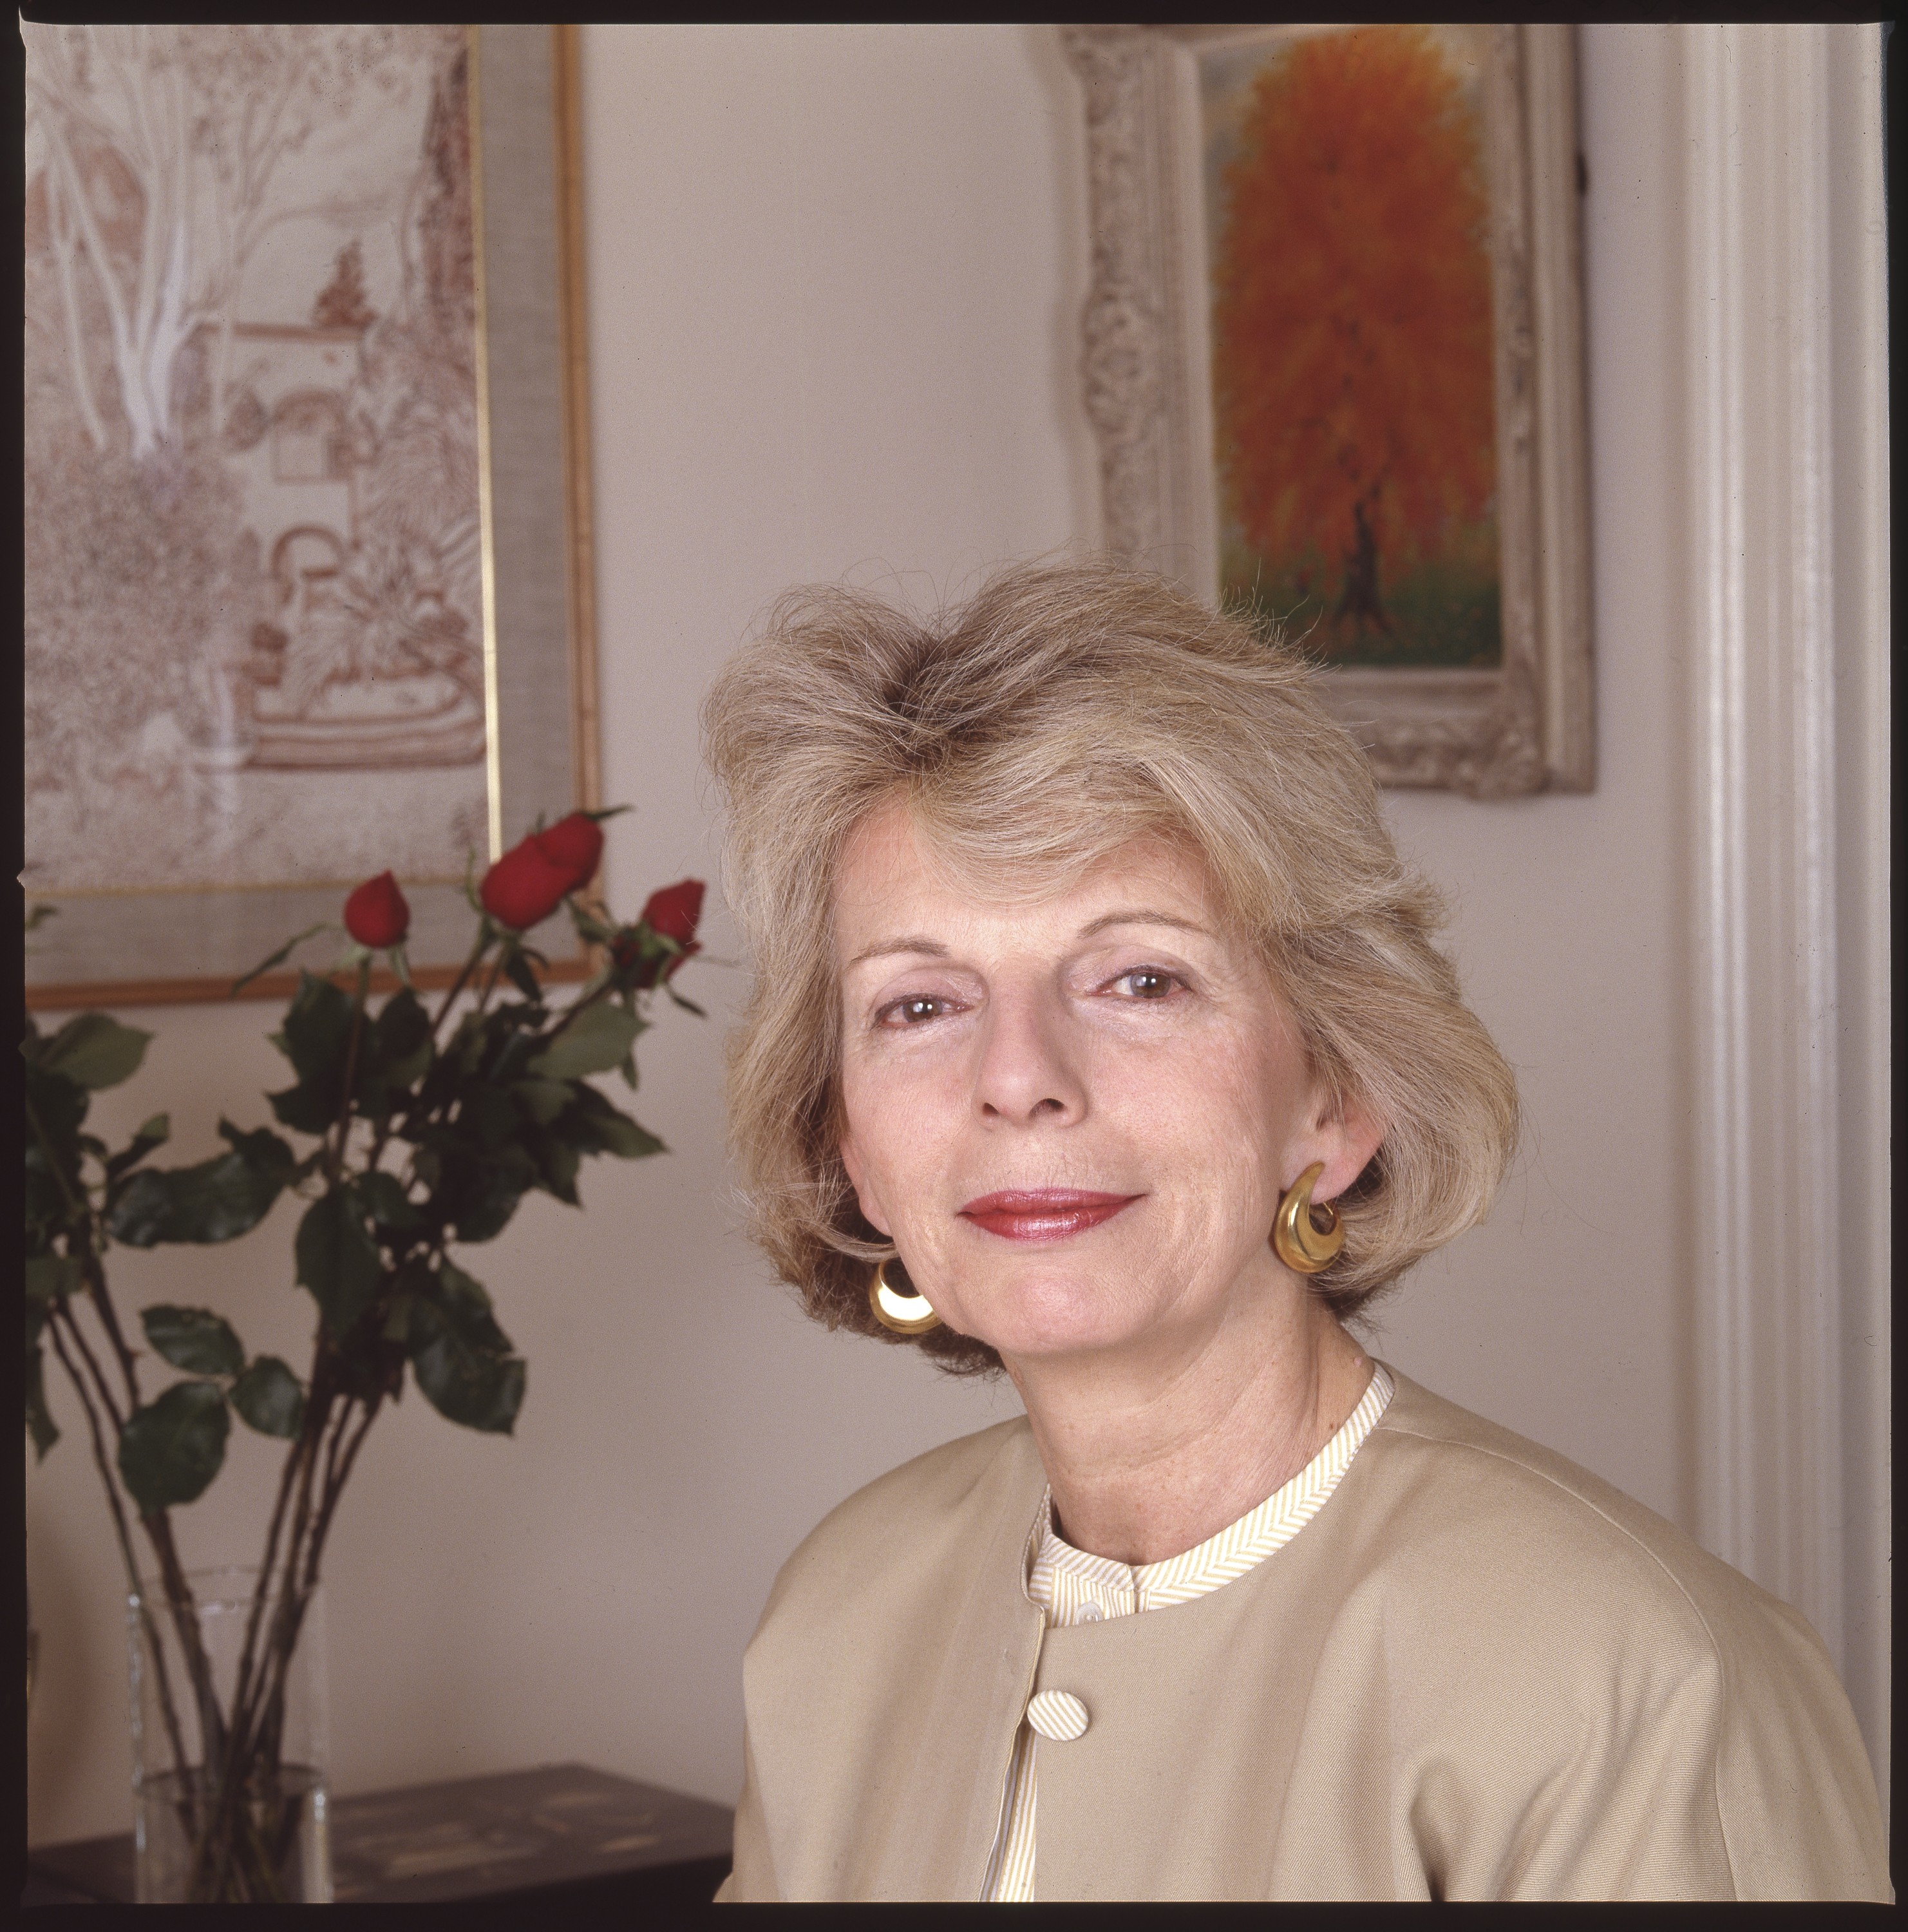 Portrait of American magazine editor Grace Mirabella as she poses in her home, New York, New York, February 16, 1989. (Photo by Michel Delsol/Getty Images) (Foto: Michel Delsol Getty Images)